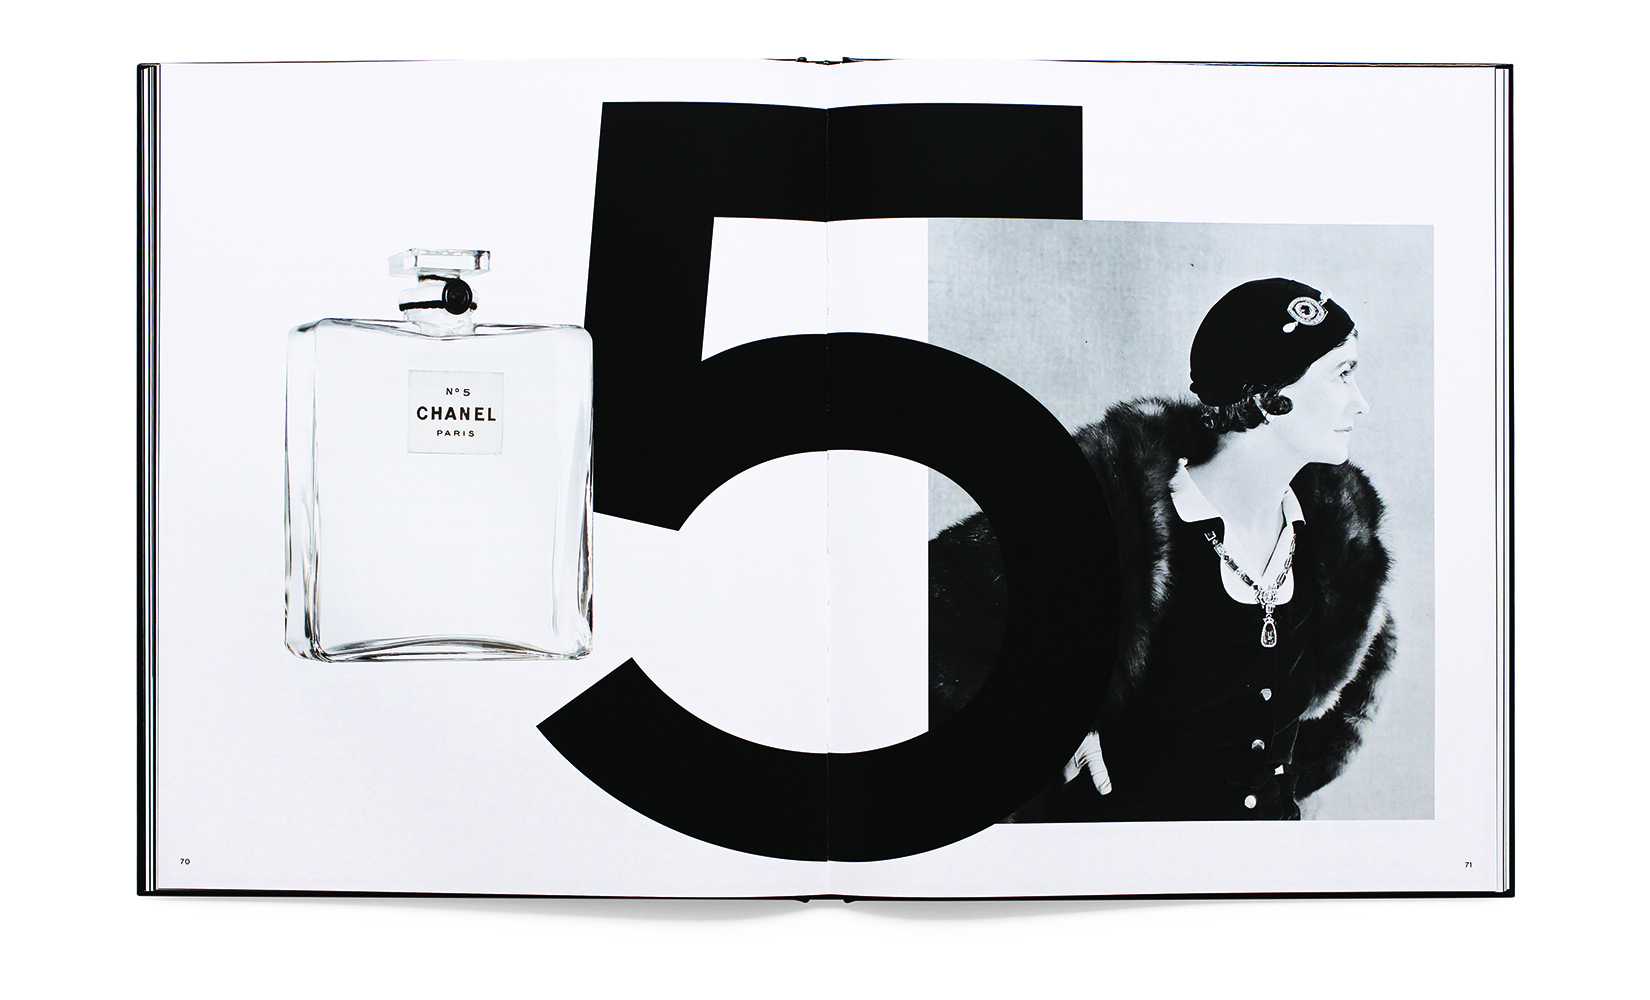 Chanel No. 5: Story of a Perfume [Book]